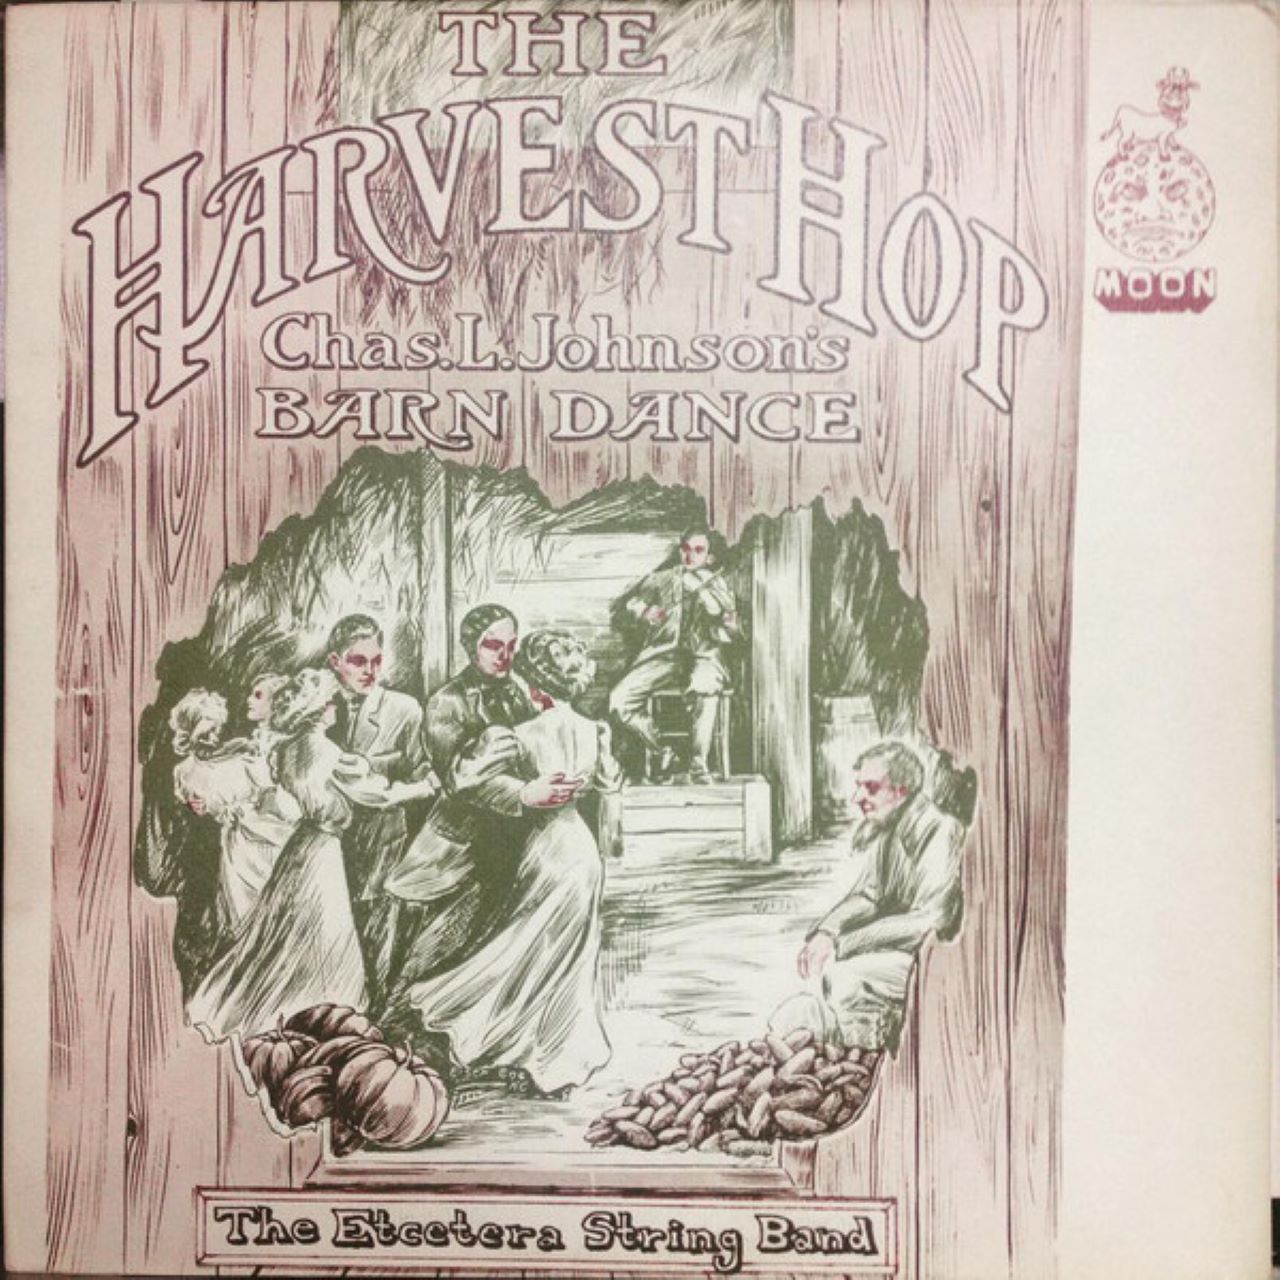 Etcetera String Band - The Harvest Hop cover band